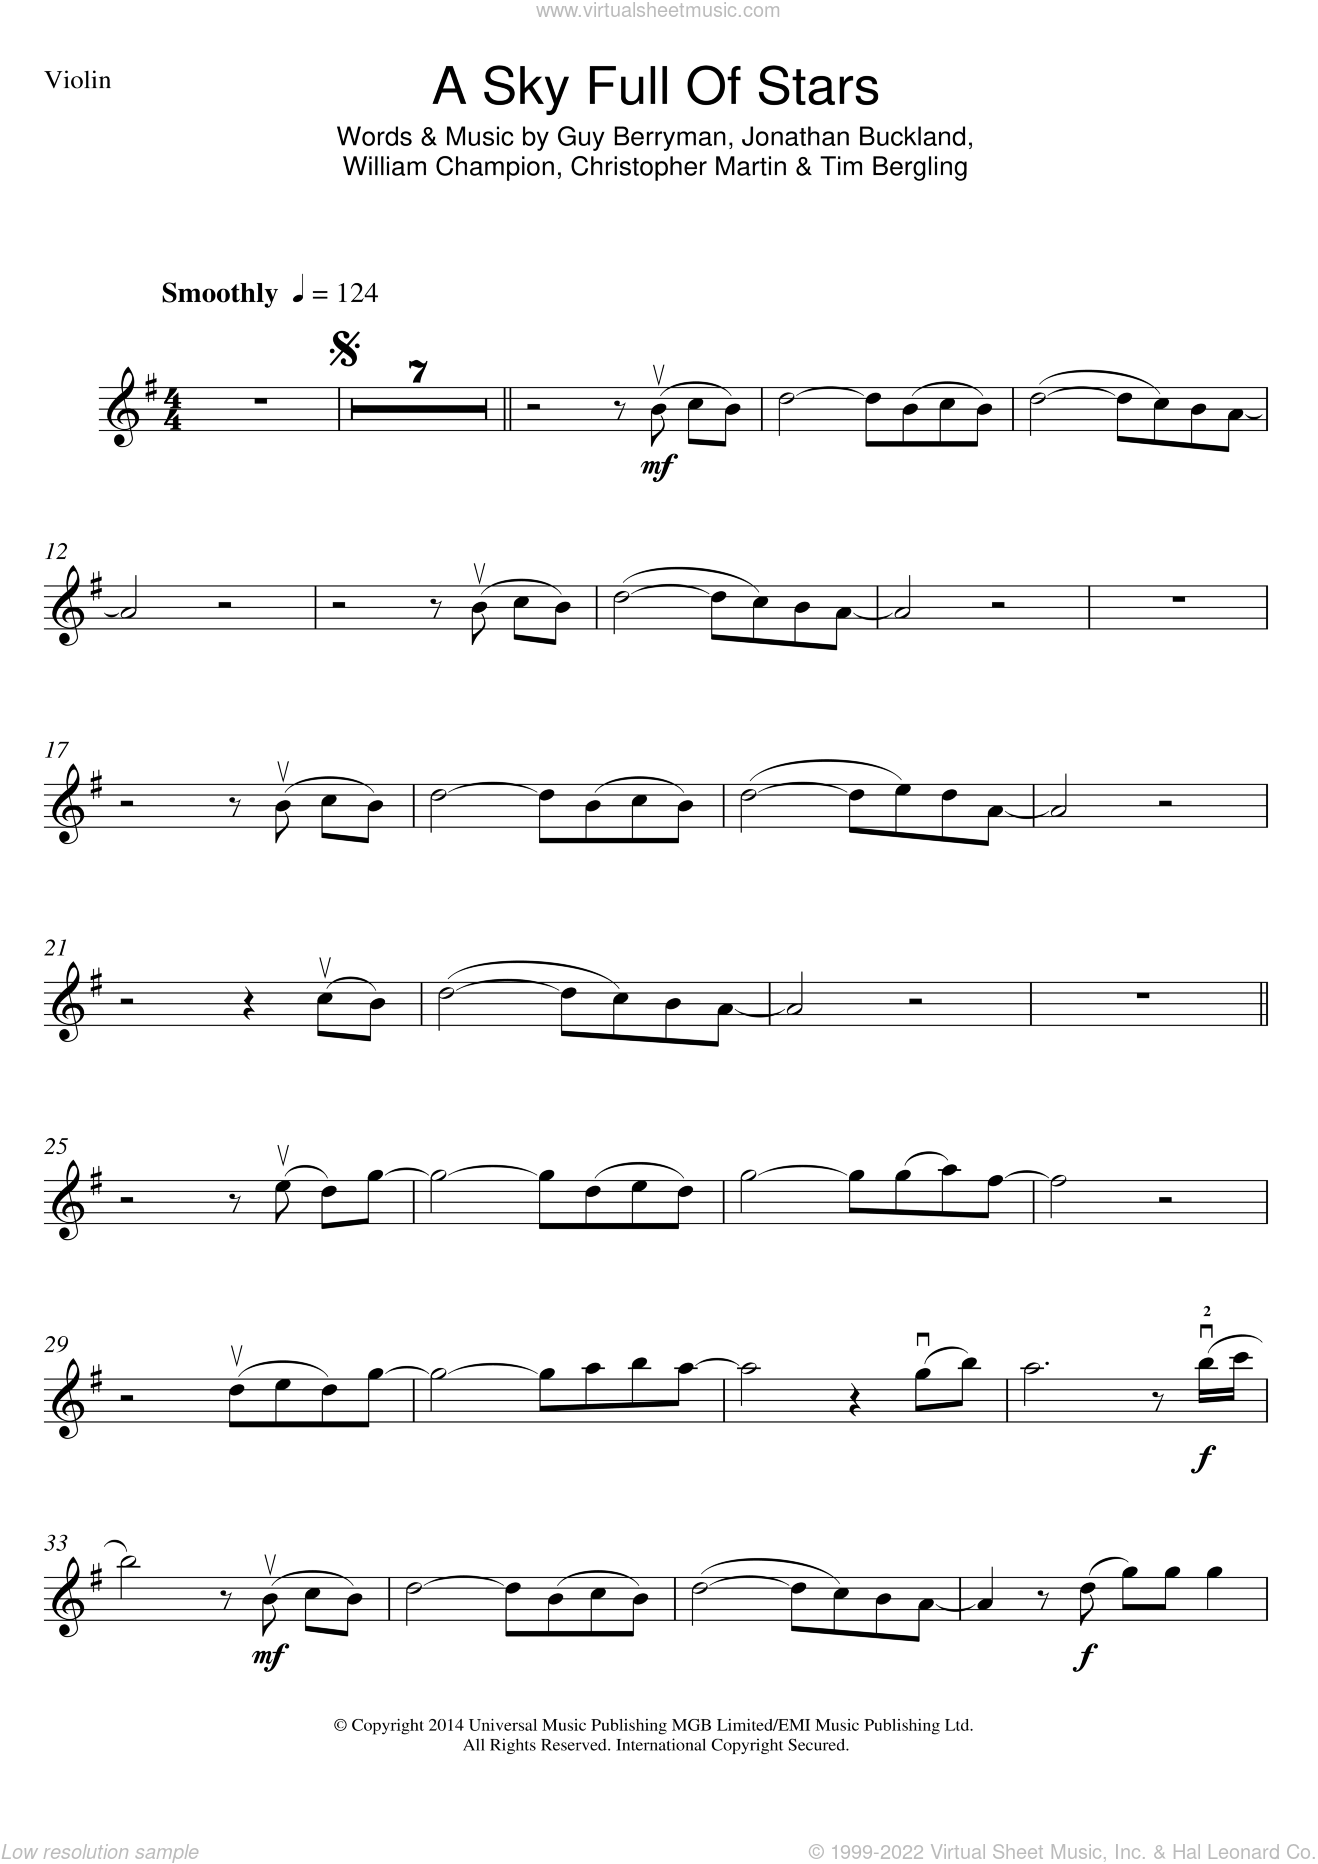 Coldplay - A Sky Full Of Stars sheet music for violin solo [PDF]